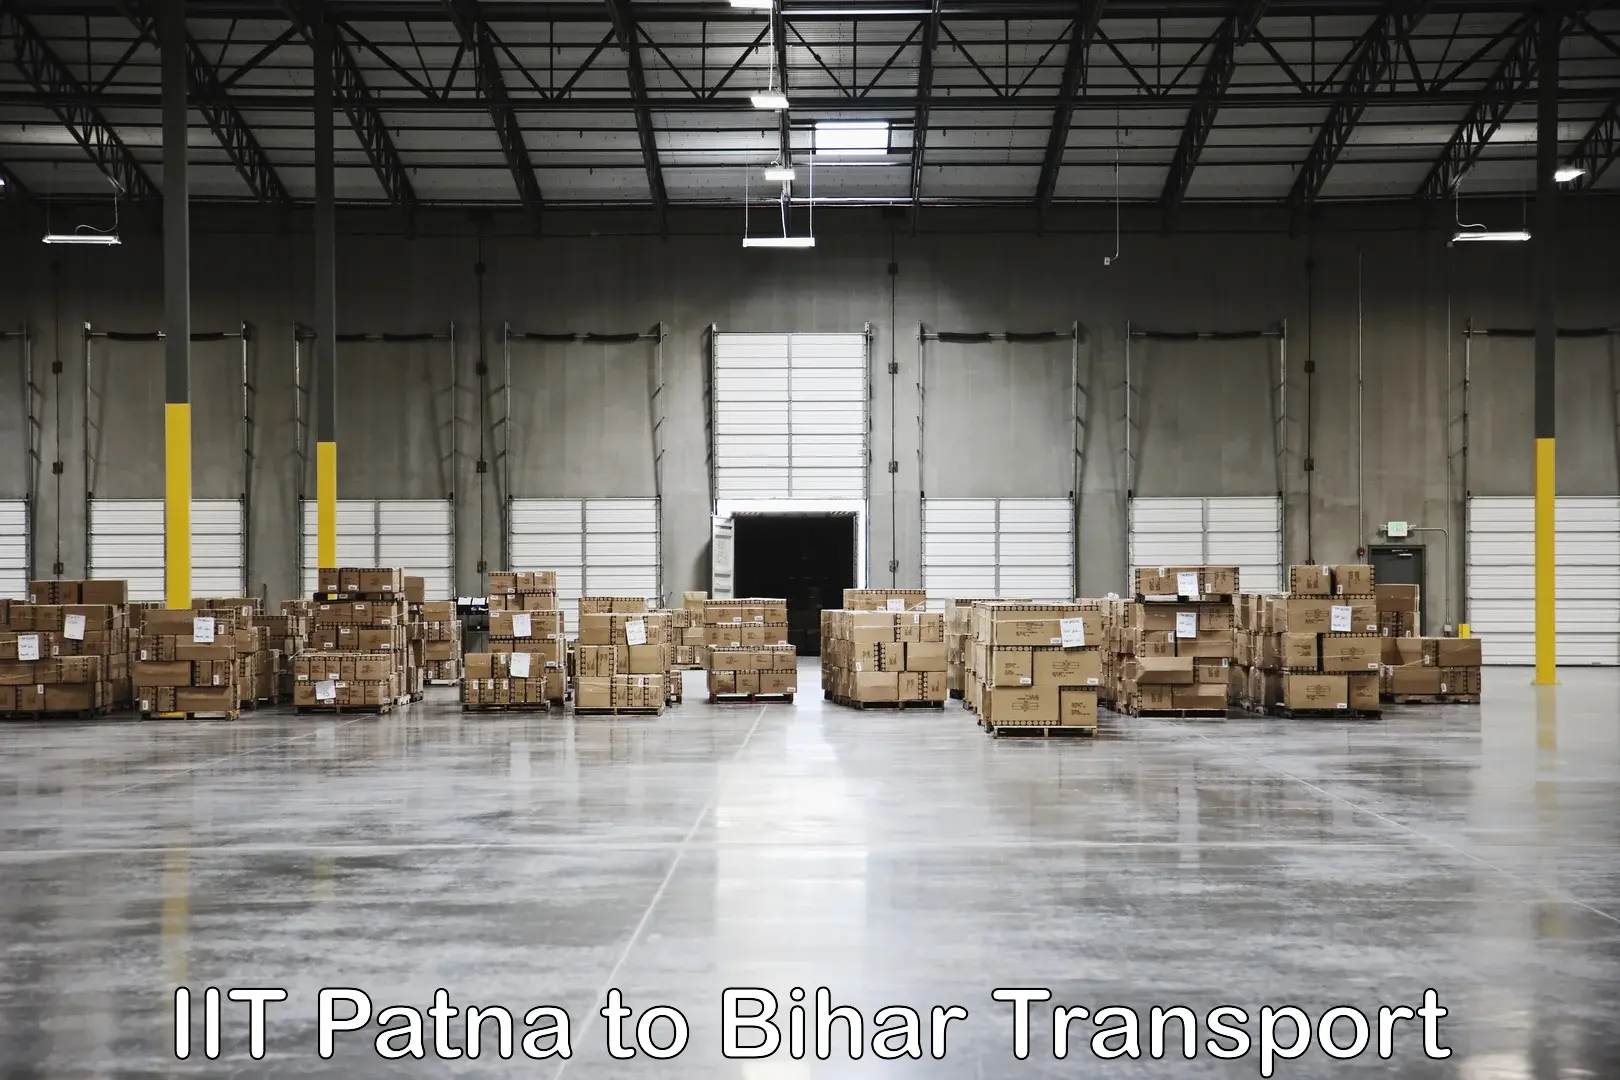 Cargo train transport services in IIT Patna to Samastipur